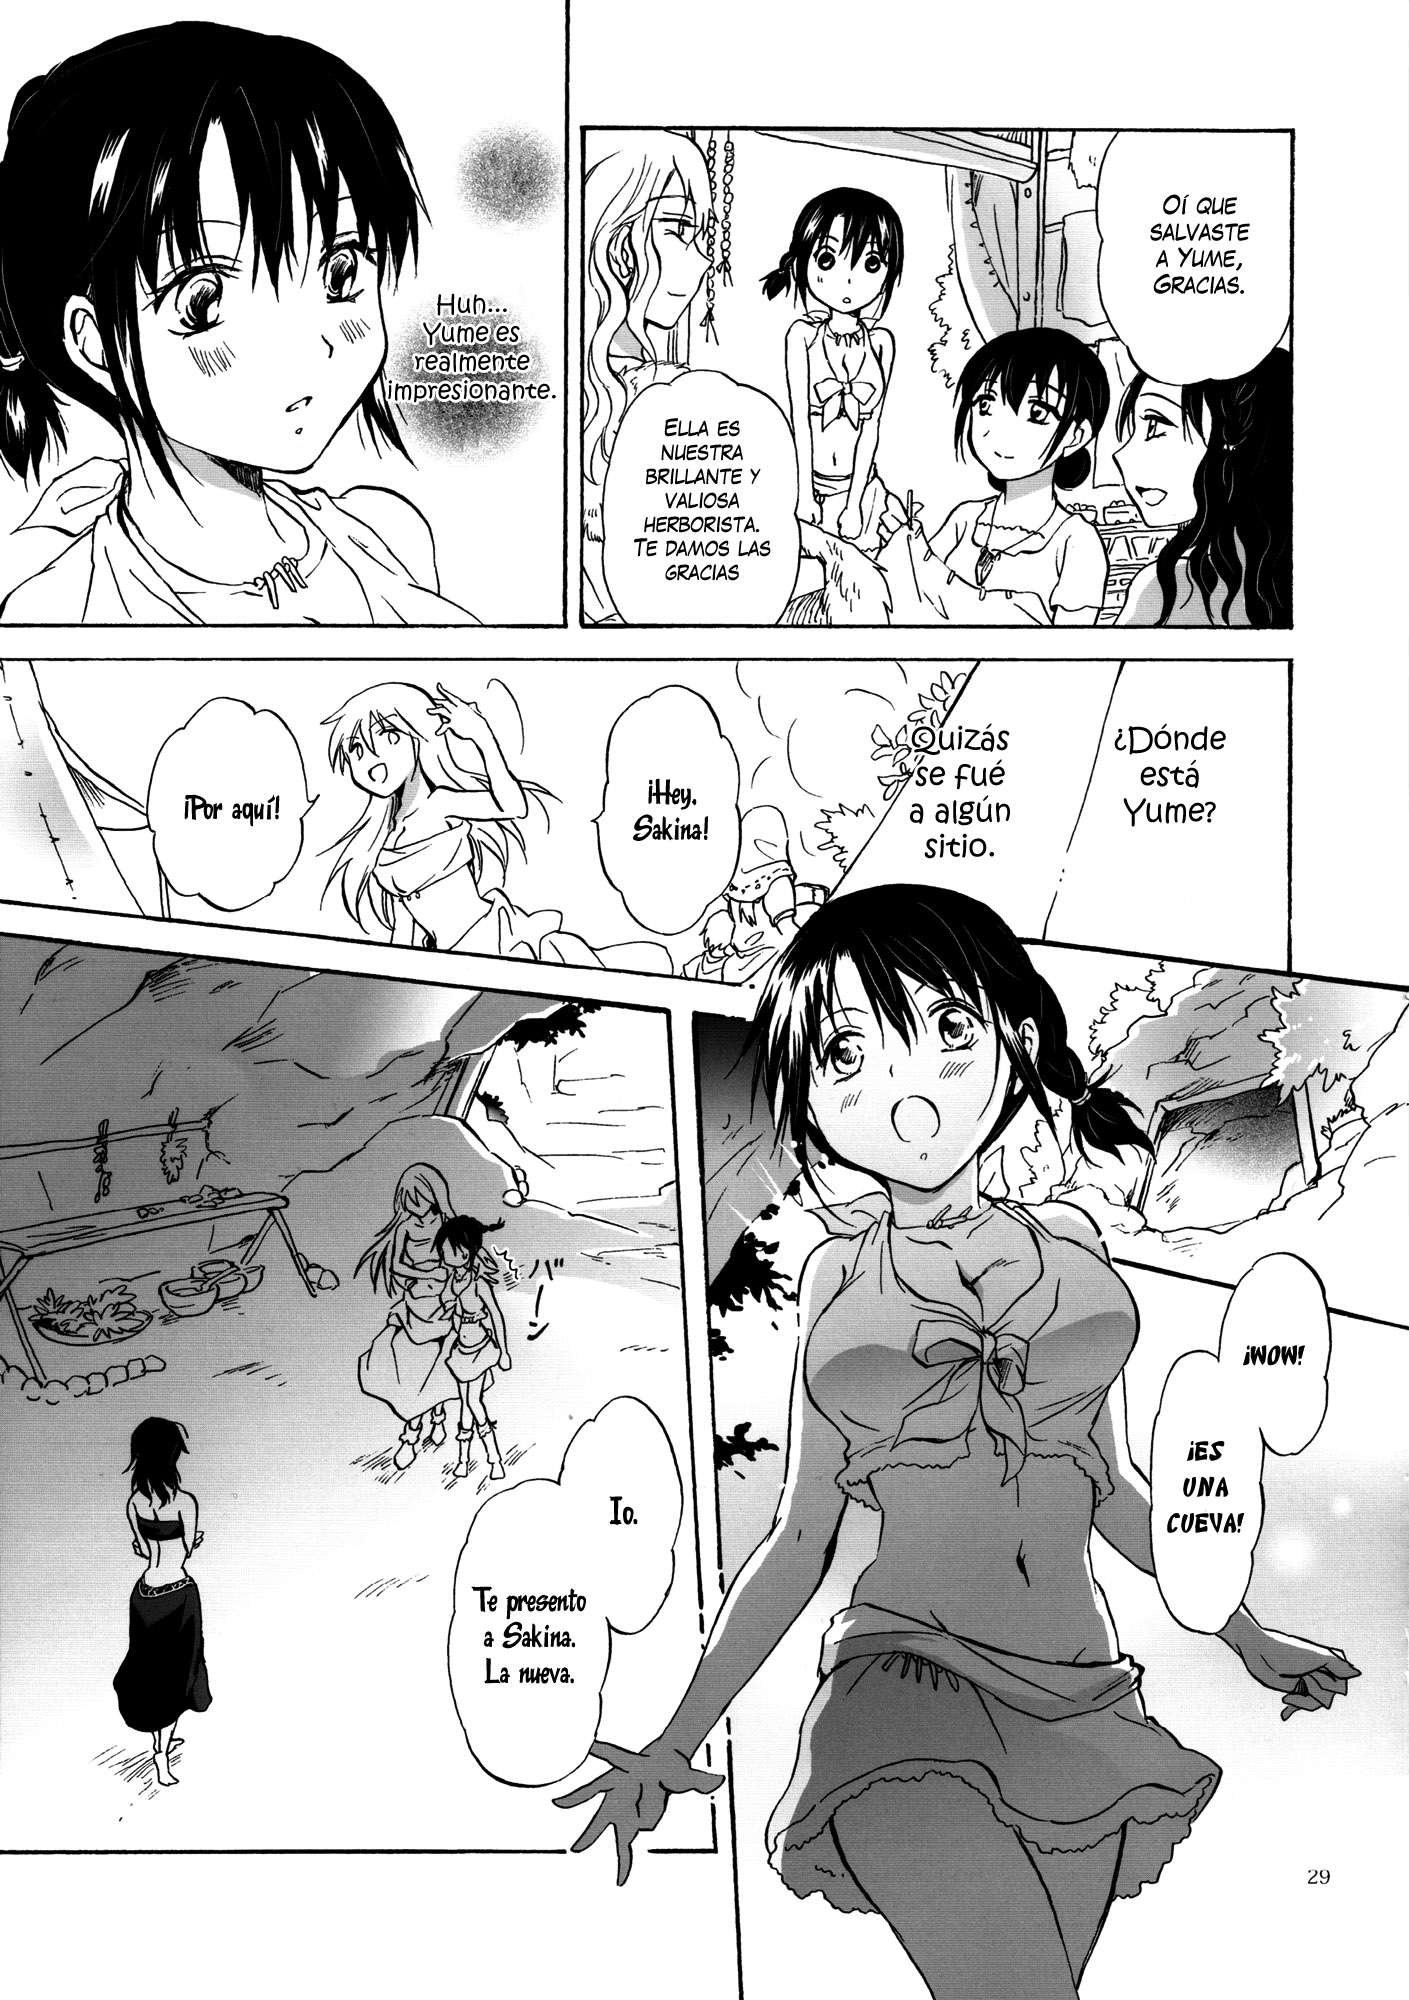 Earth Girls Chapter-2 - 6